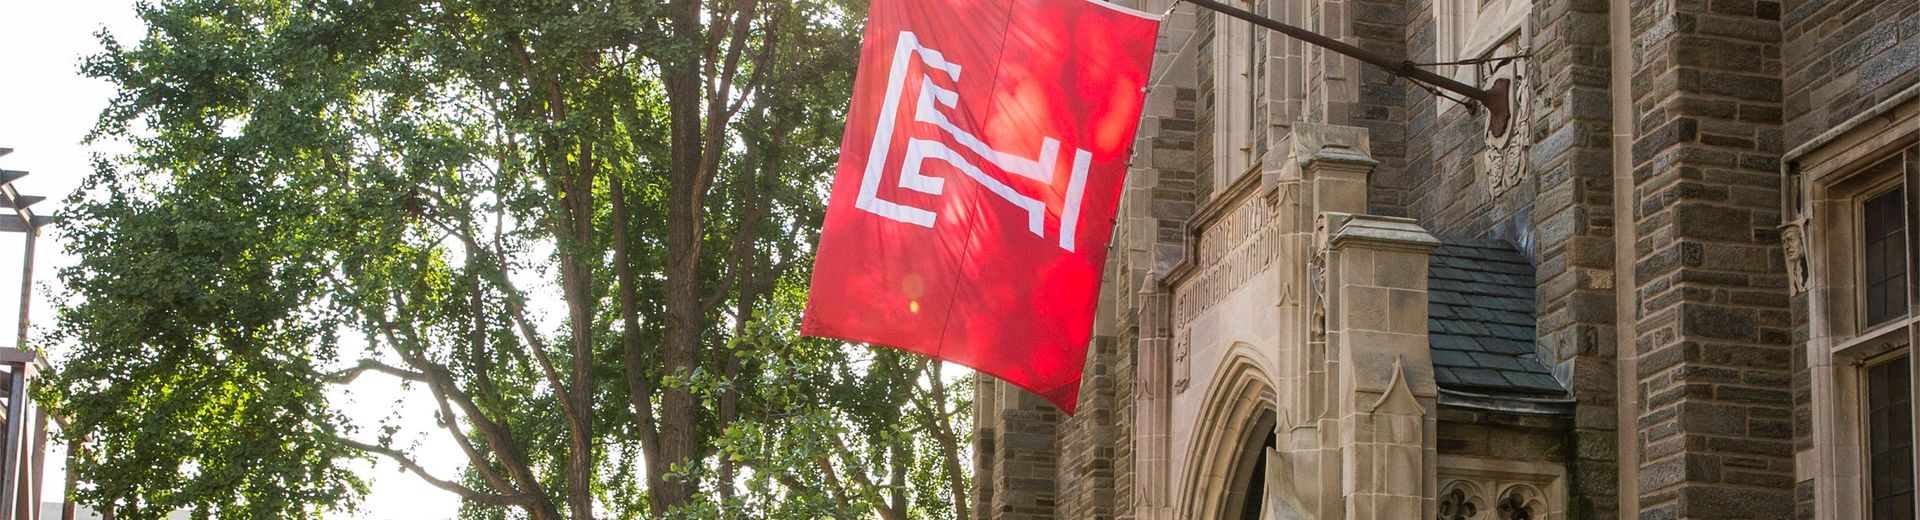 Temple University flag hangs from a historic building on campus.